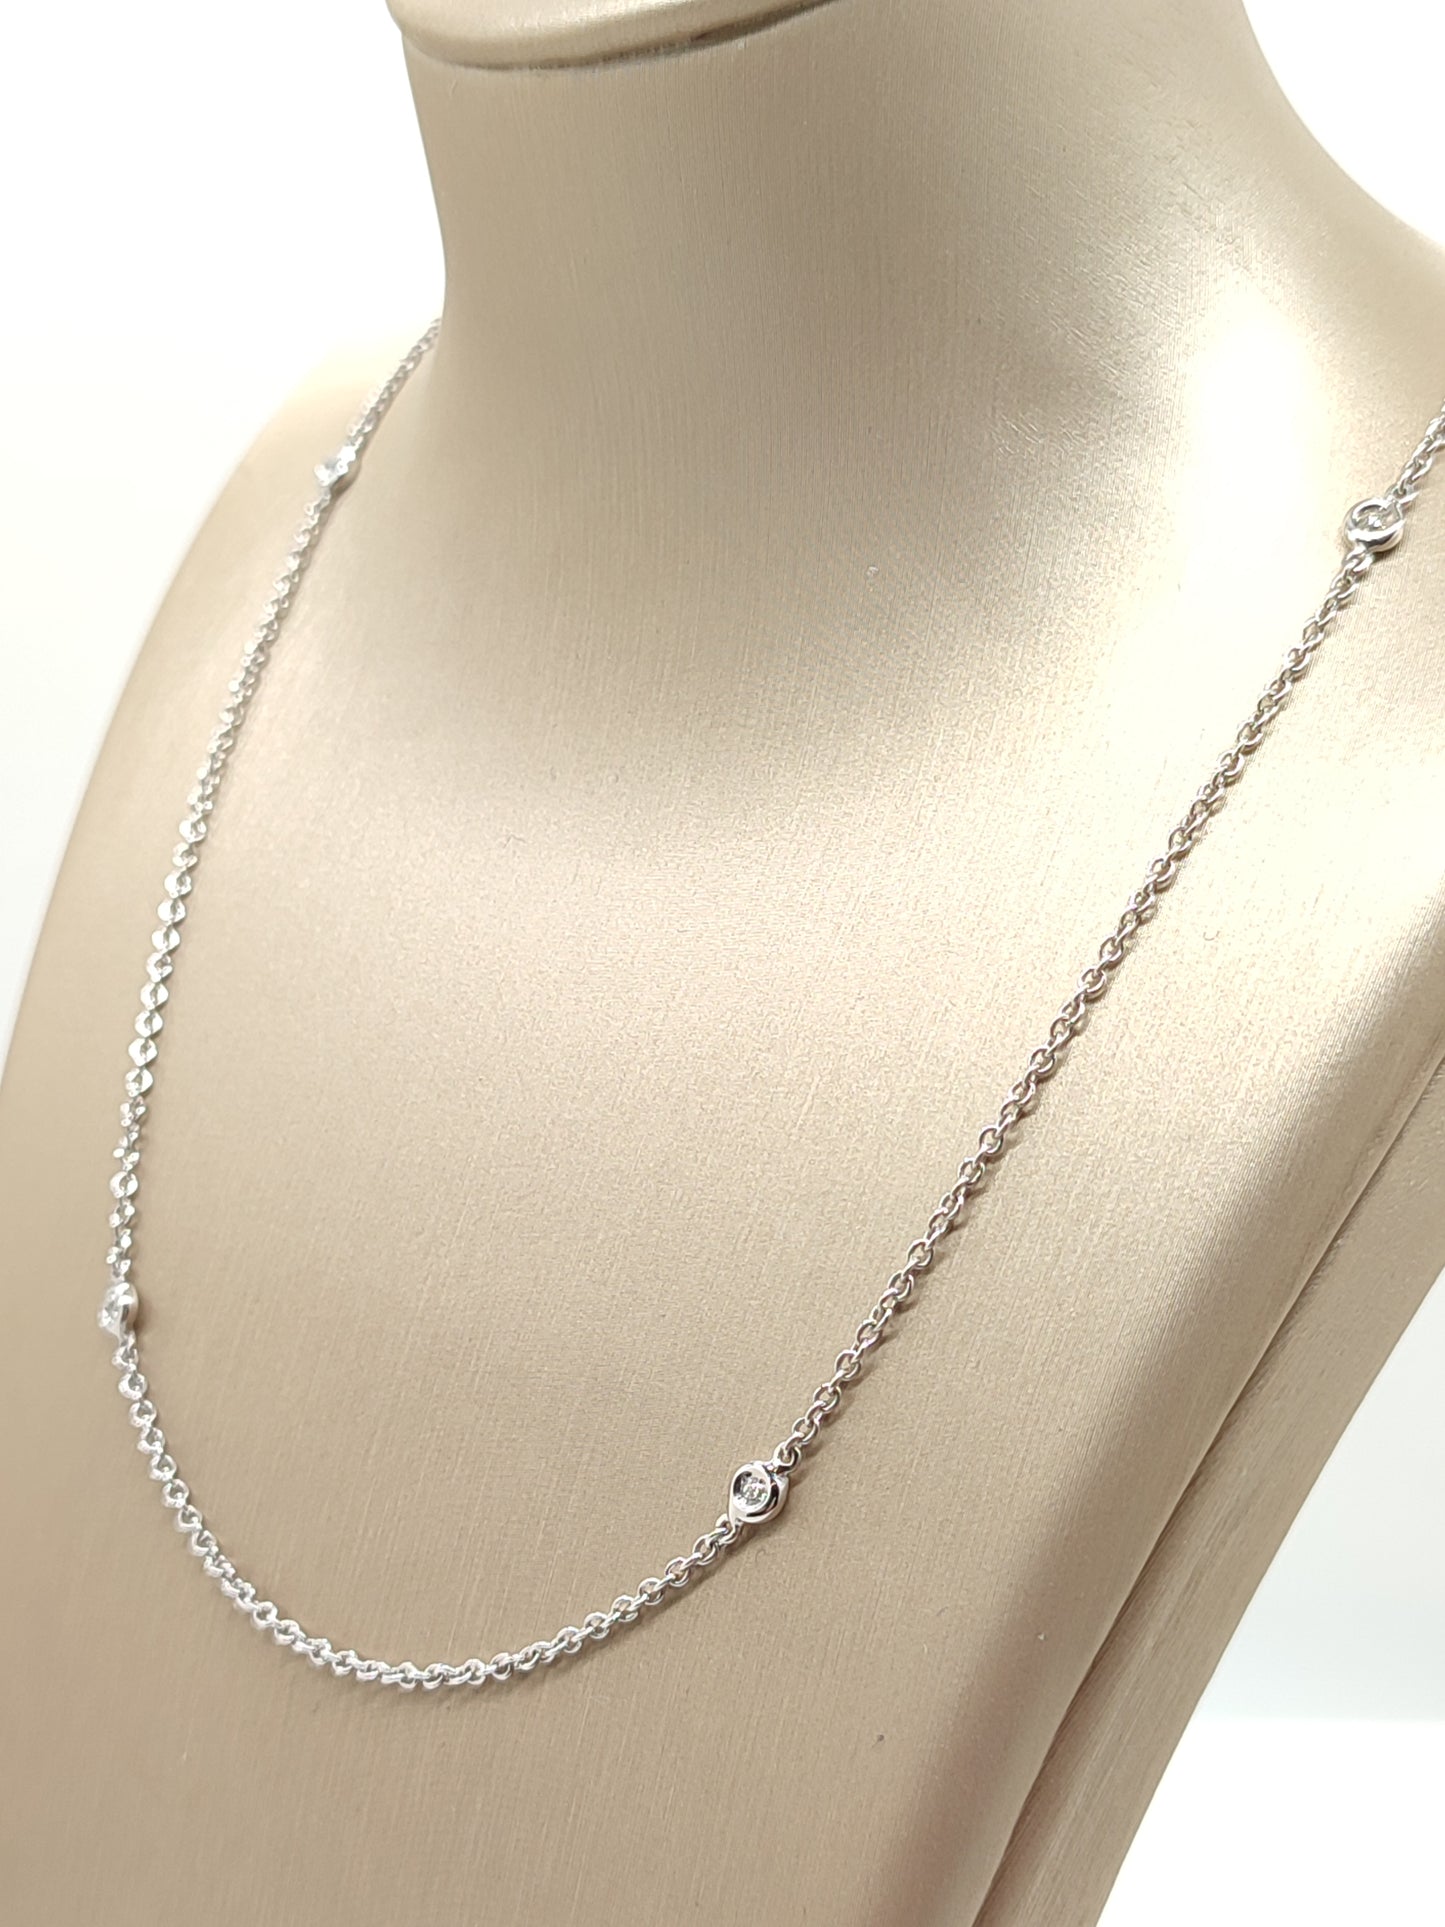 Gold necklace with 0.18ct diamonds